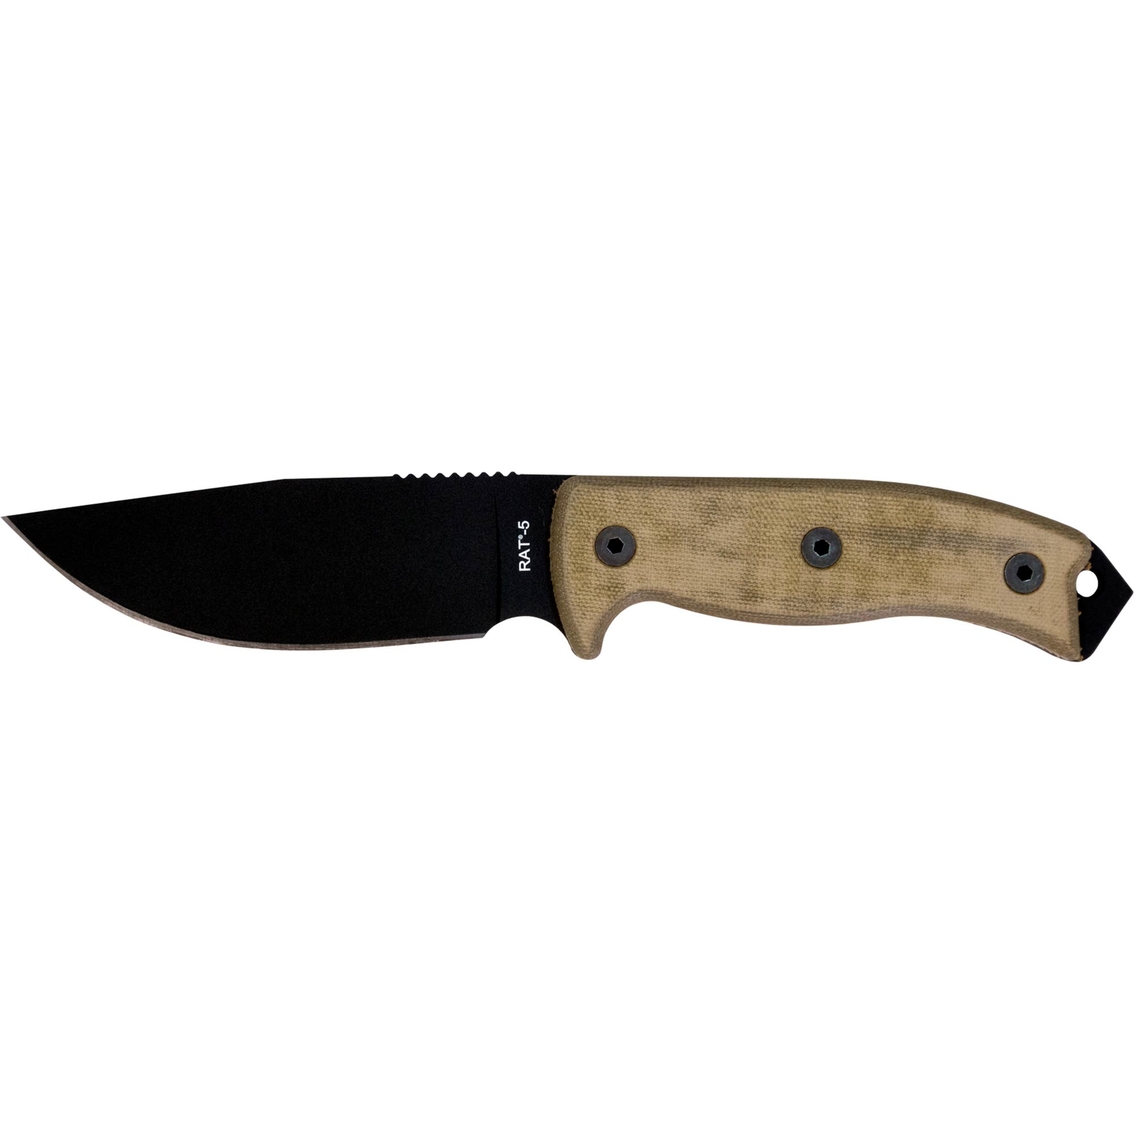 Ontario Rat-5 Knife With Nylon Sheath | Knives & Tools | Father's Day ...